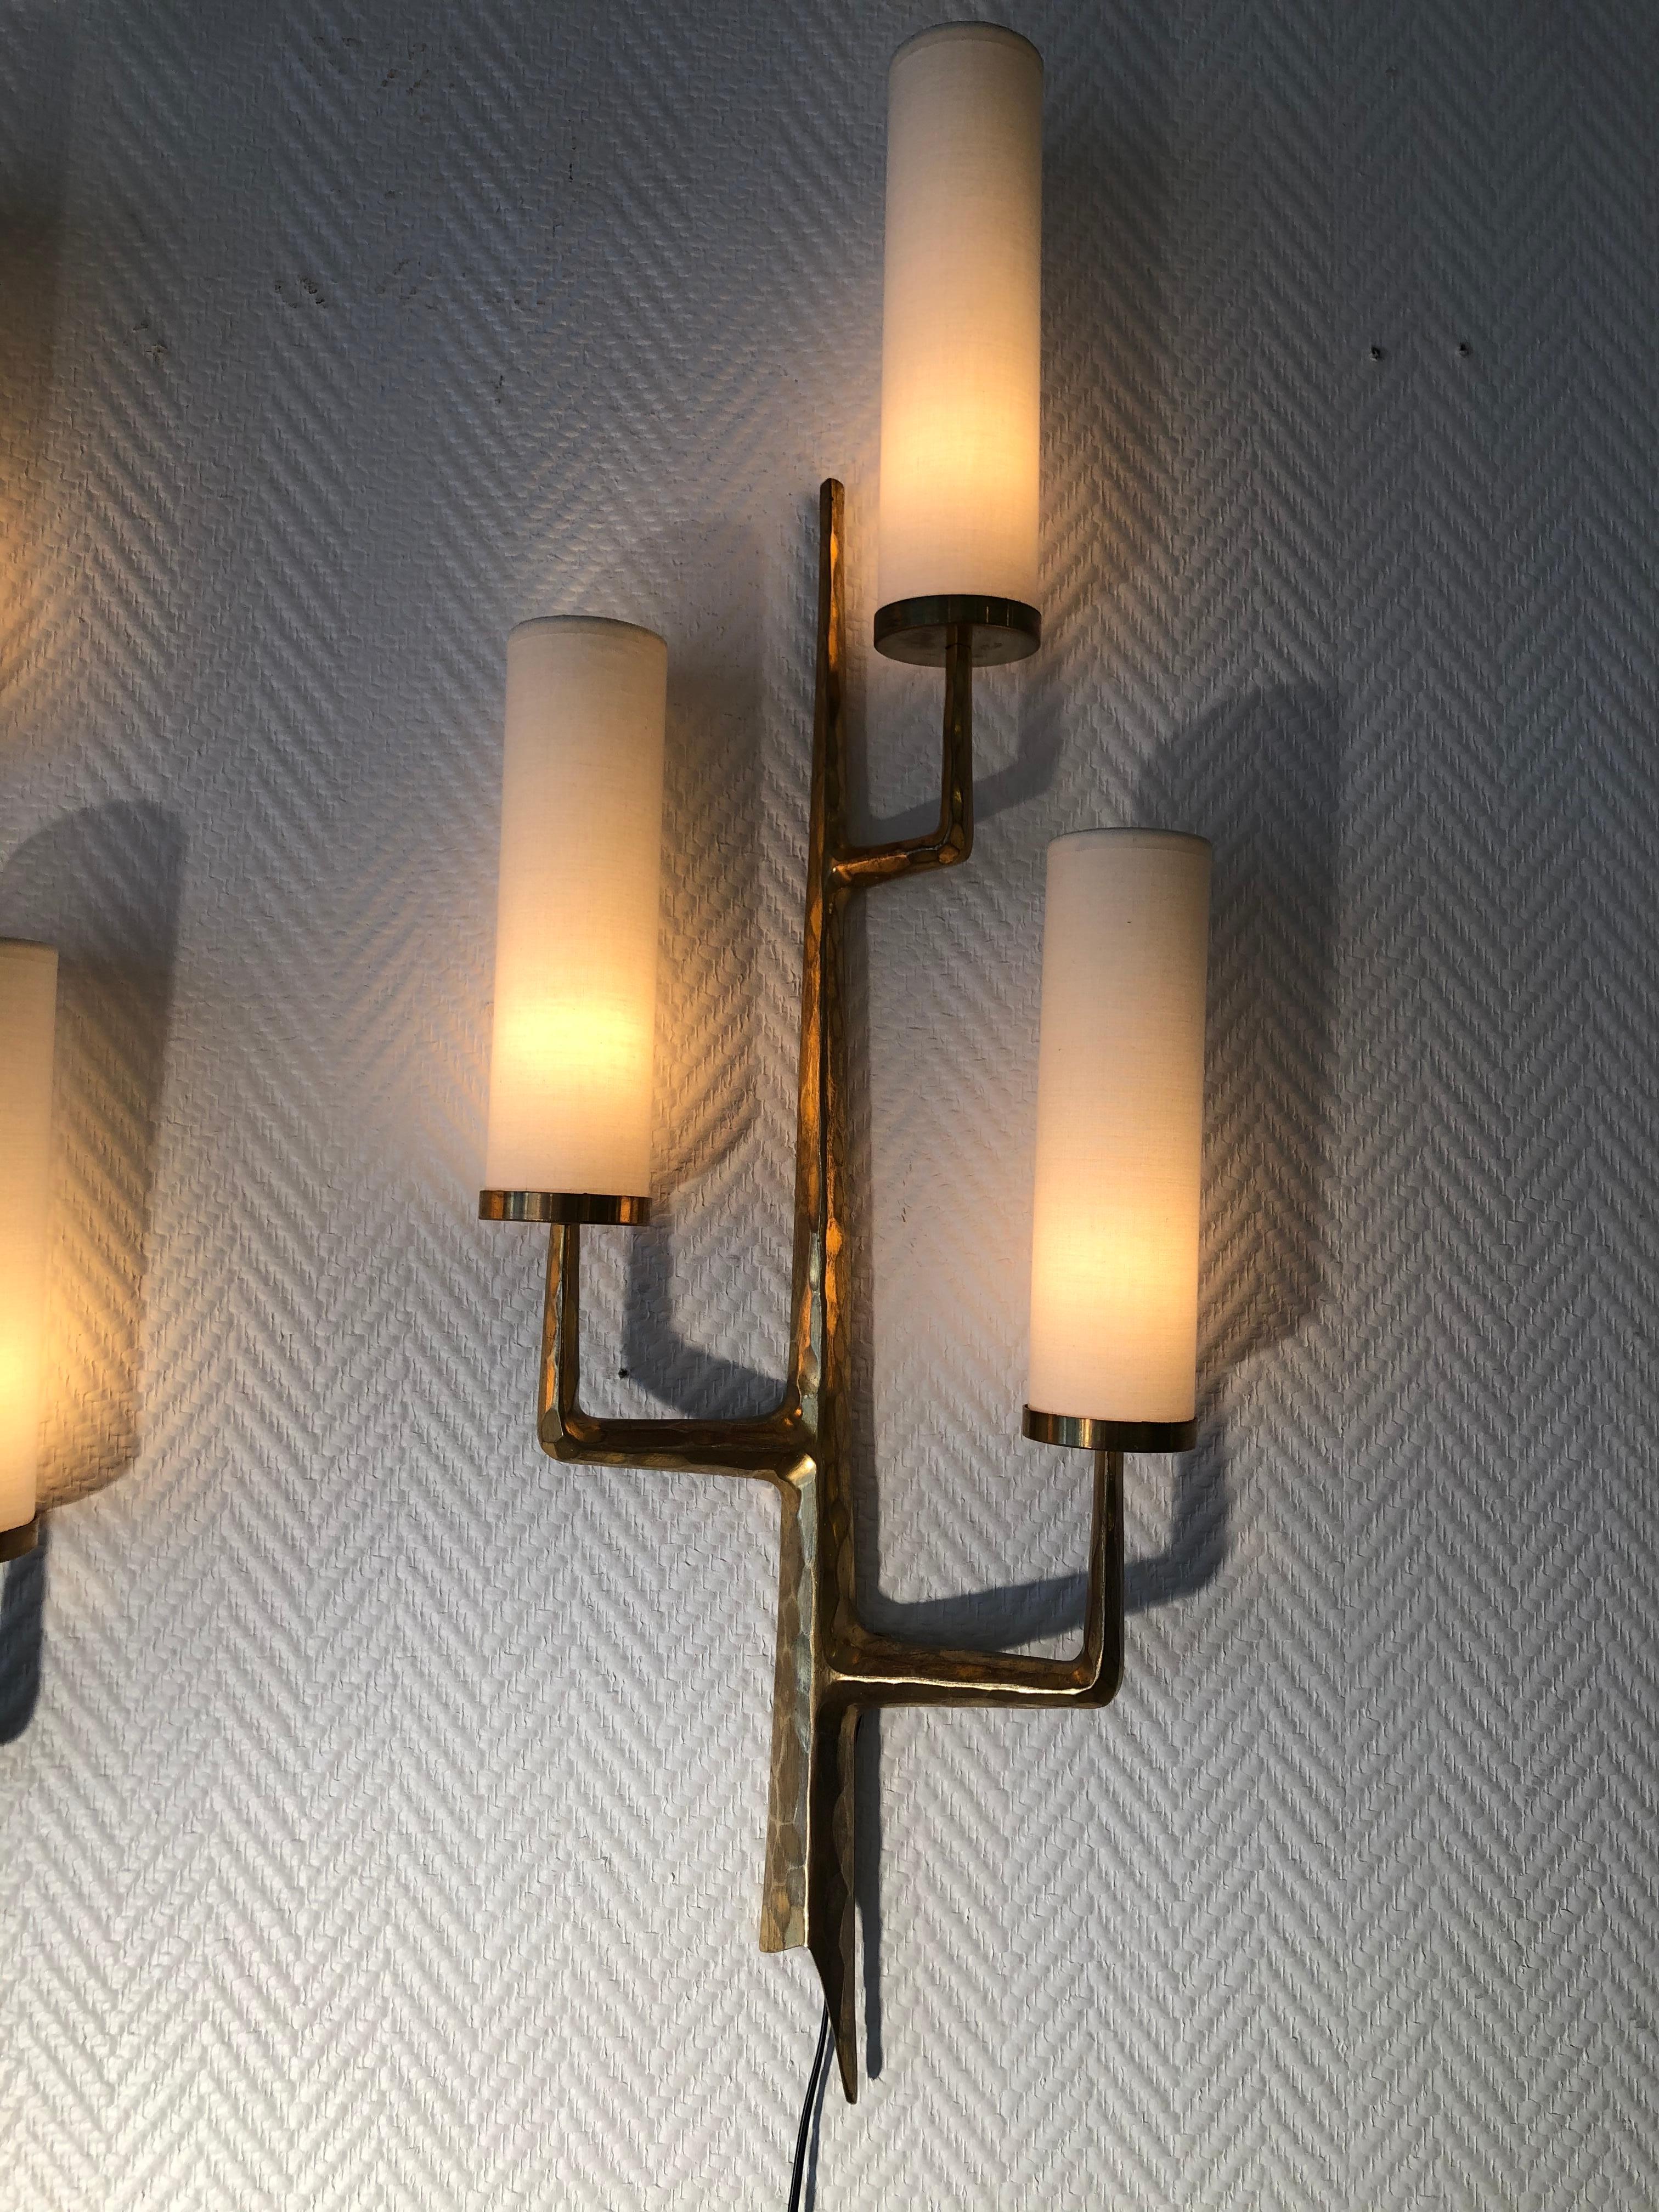 Pair of bronze wall sconces with three light arms by Maison Arlus
From 1950 -bronze and lampshade
Perfect condition.